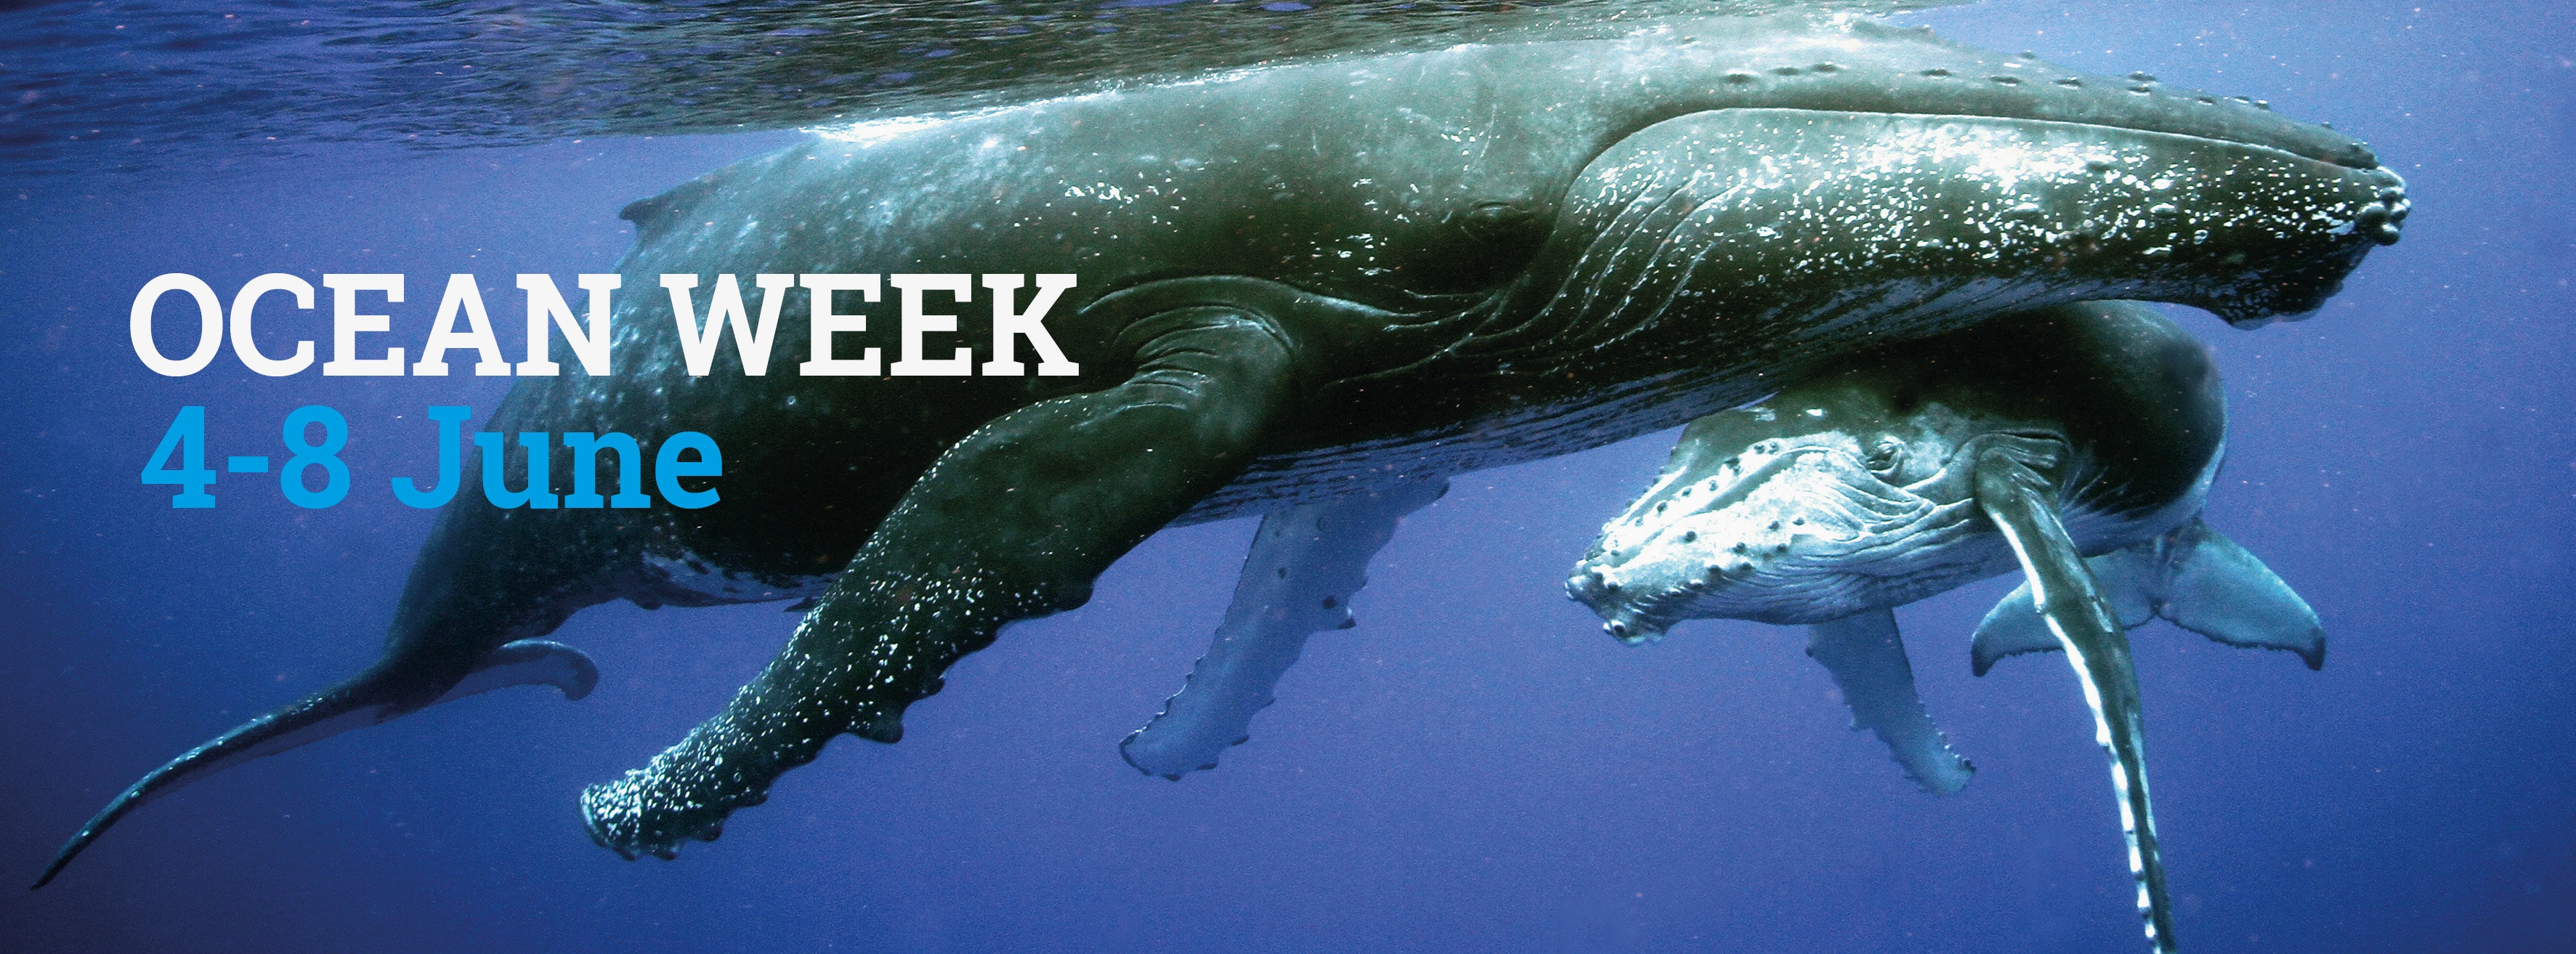 Ocean Week: Making a whale of a difference to coastal communities, the ocean  and planet Earth - EIA